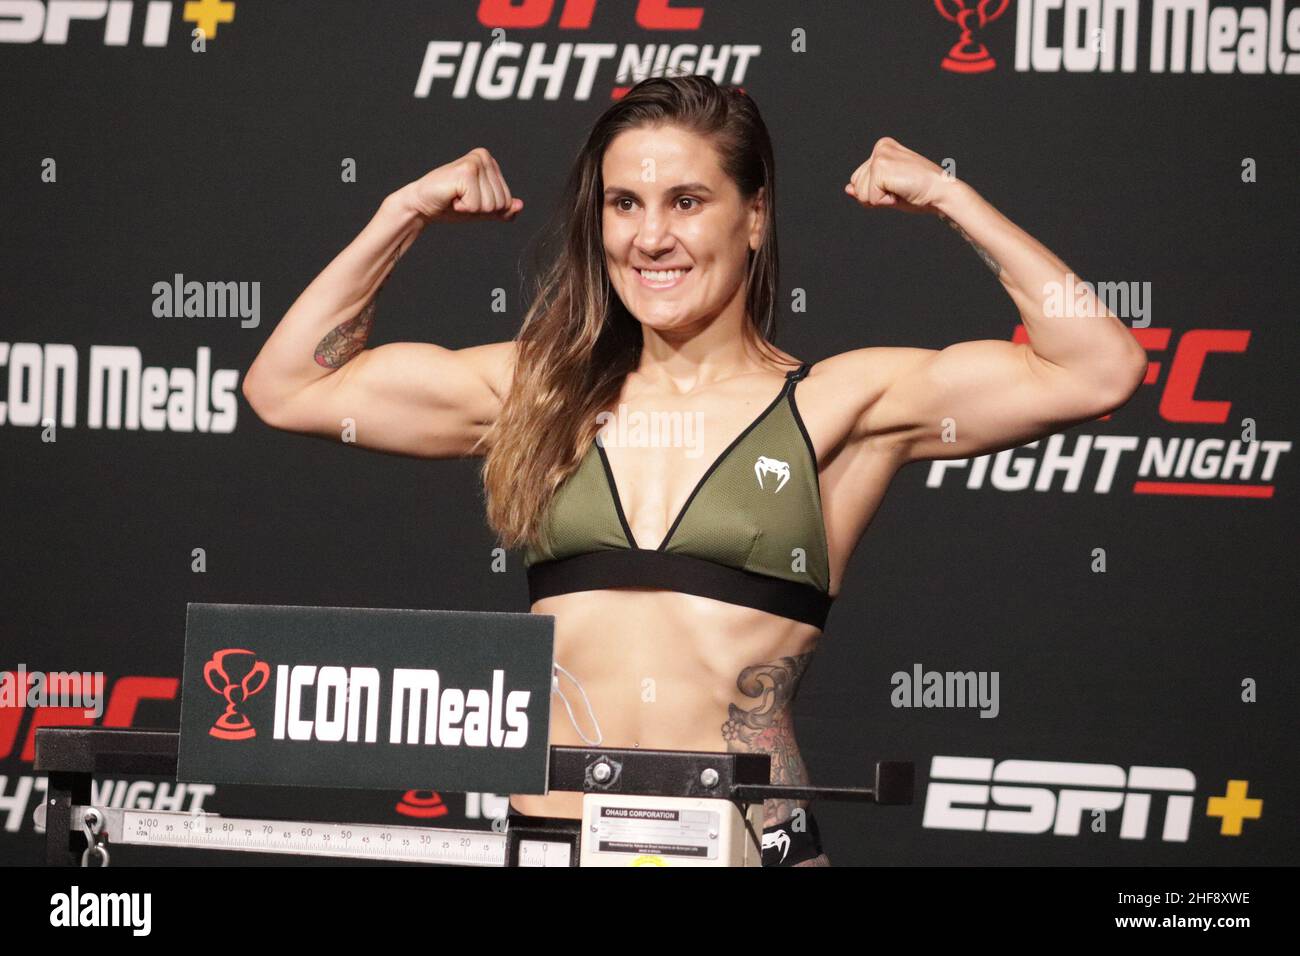 Las Vegas, USA. 14th Jan, 2022. LAS VEGAS, NV - JANUARY 14: Jennifer Maia poses on the scale during the UFC Vegas 46: Kattar v Chikadze Weigh in at UFC Apex on January 14, 2022 in Las Vegas, Nevada, United States. (Photo by Diego Ribas/PxImages) Credit: Px Images/Alamy Live News Stock Photo